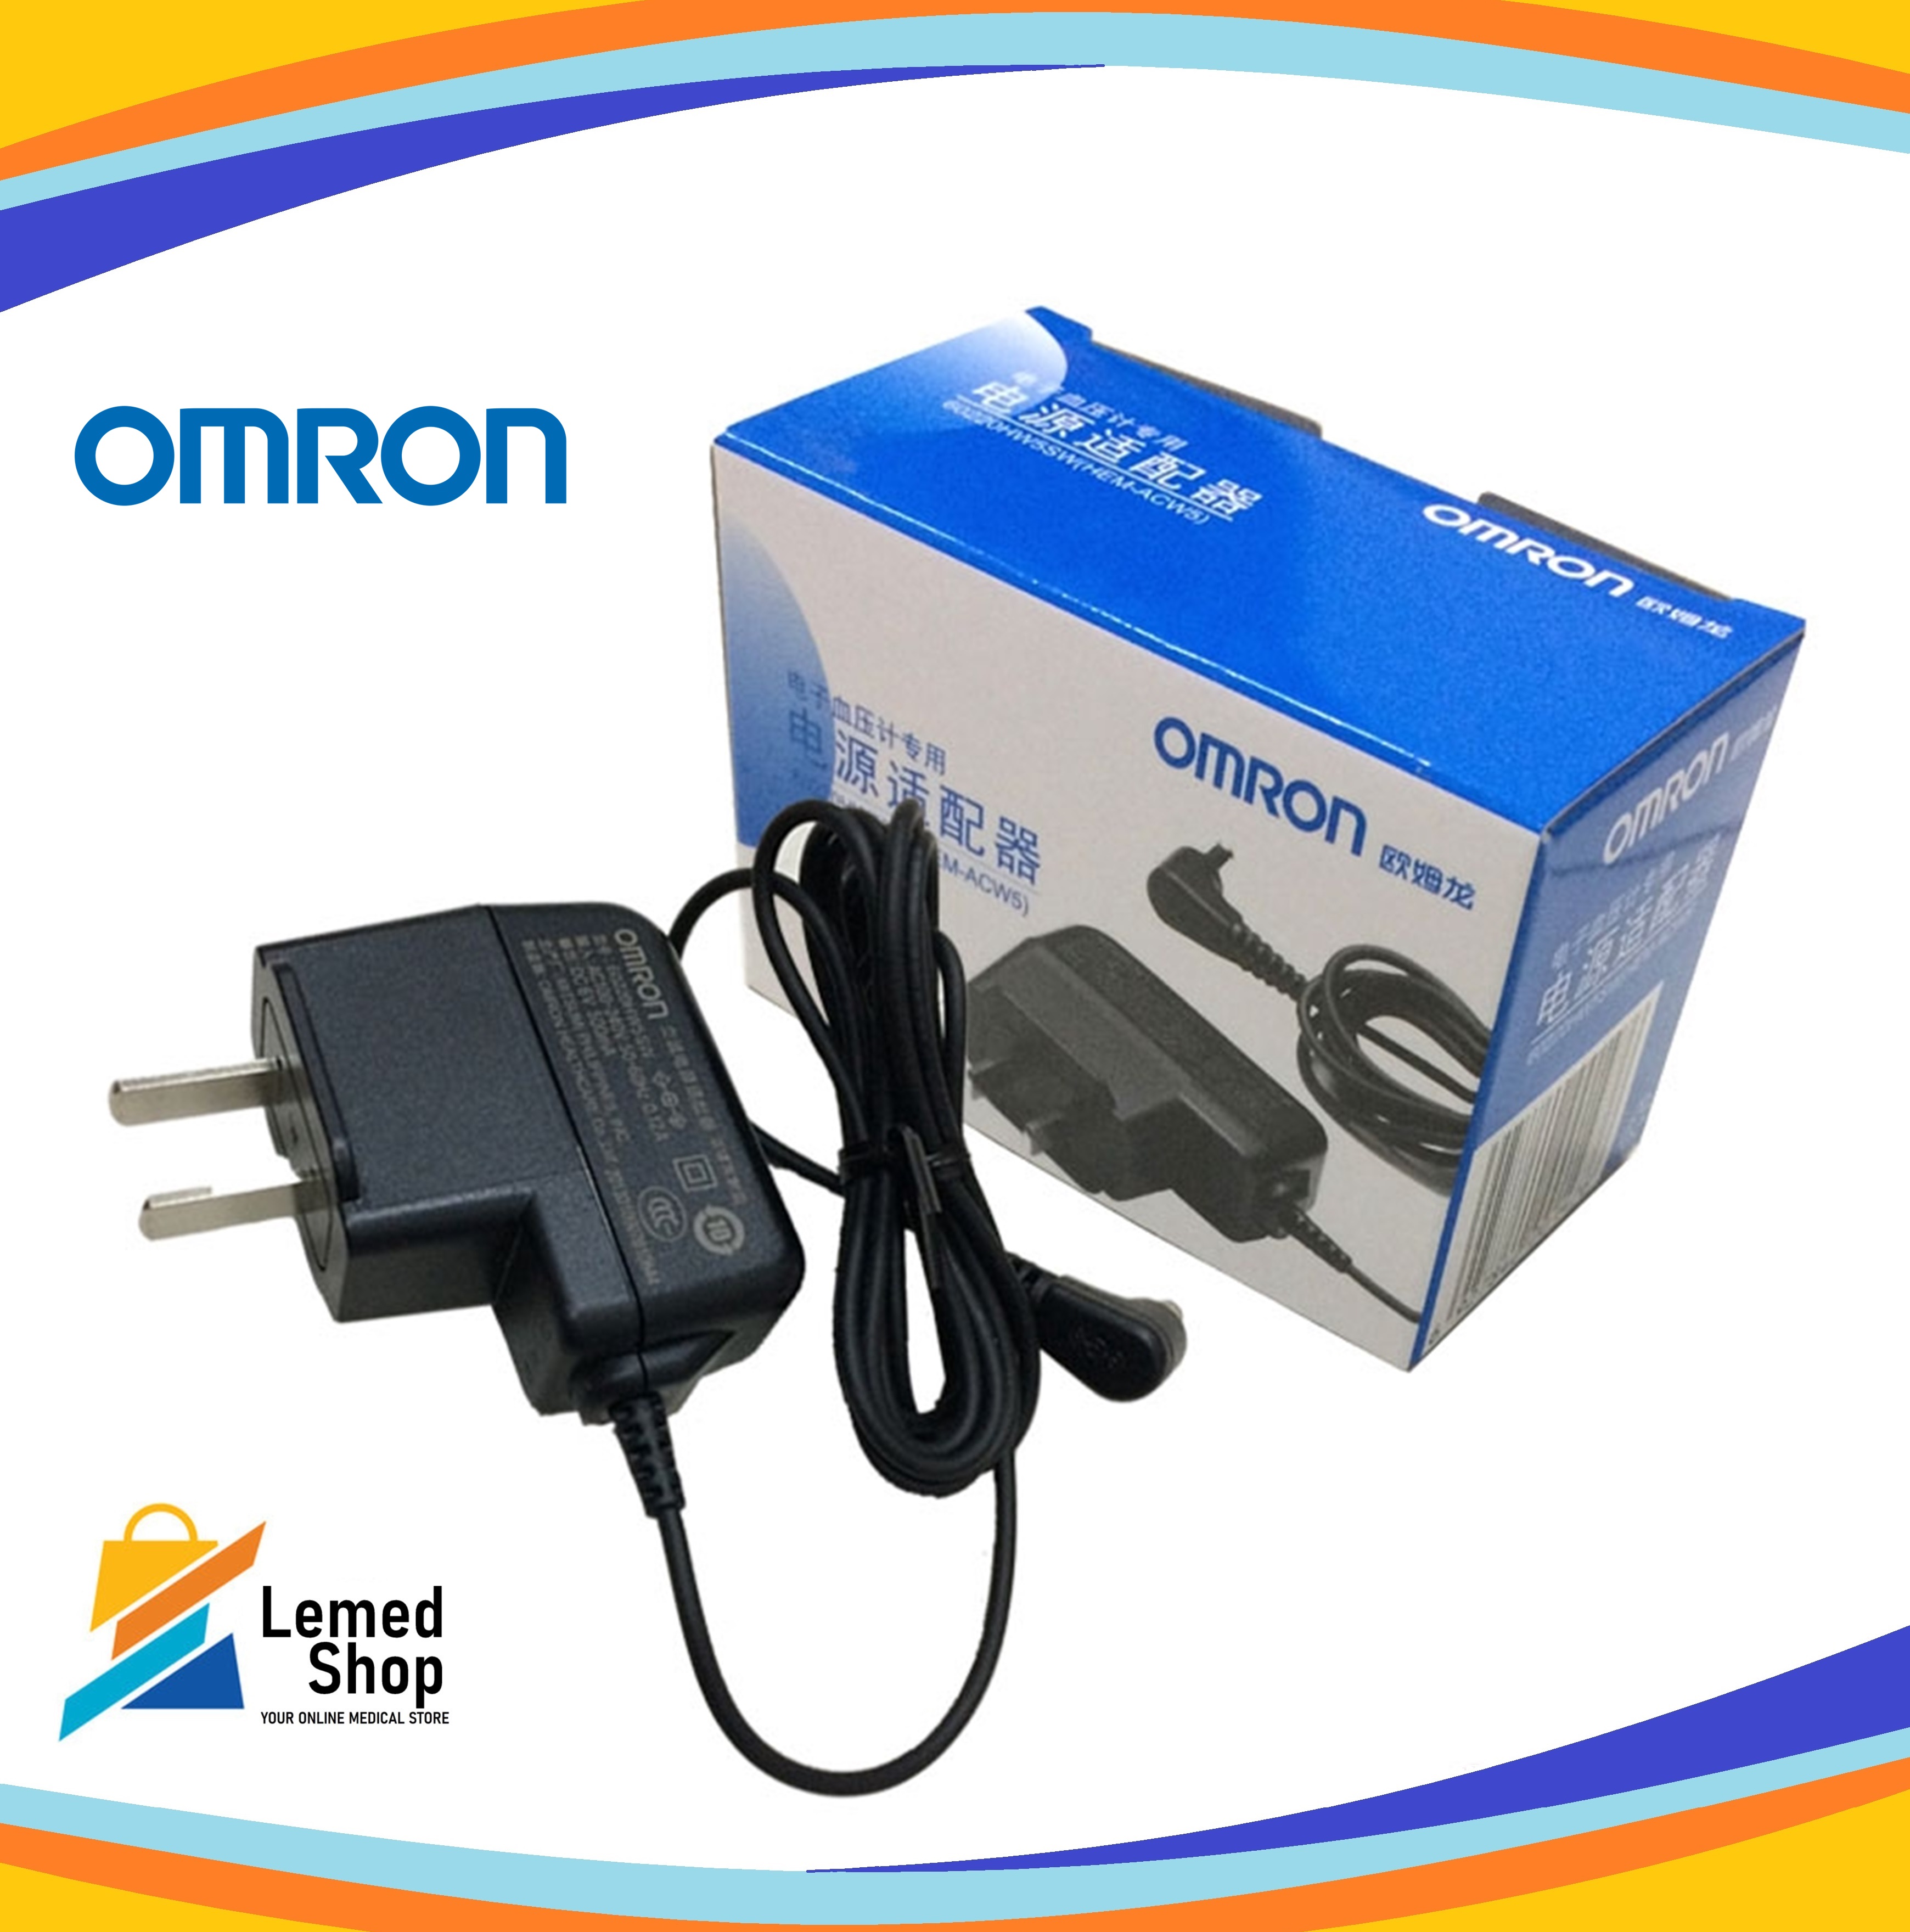  T POWER Charger Compatible for Omron 5 Silver BP5250 Gold  BP5350,HEM-71571T-Z 7 10 Series BP742N BP760N BP761 BP785N BP786N Upper Arm Blood  Pressure Monitor Ac Adapter Power Supply(no Need Batteries) 